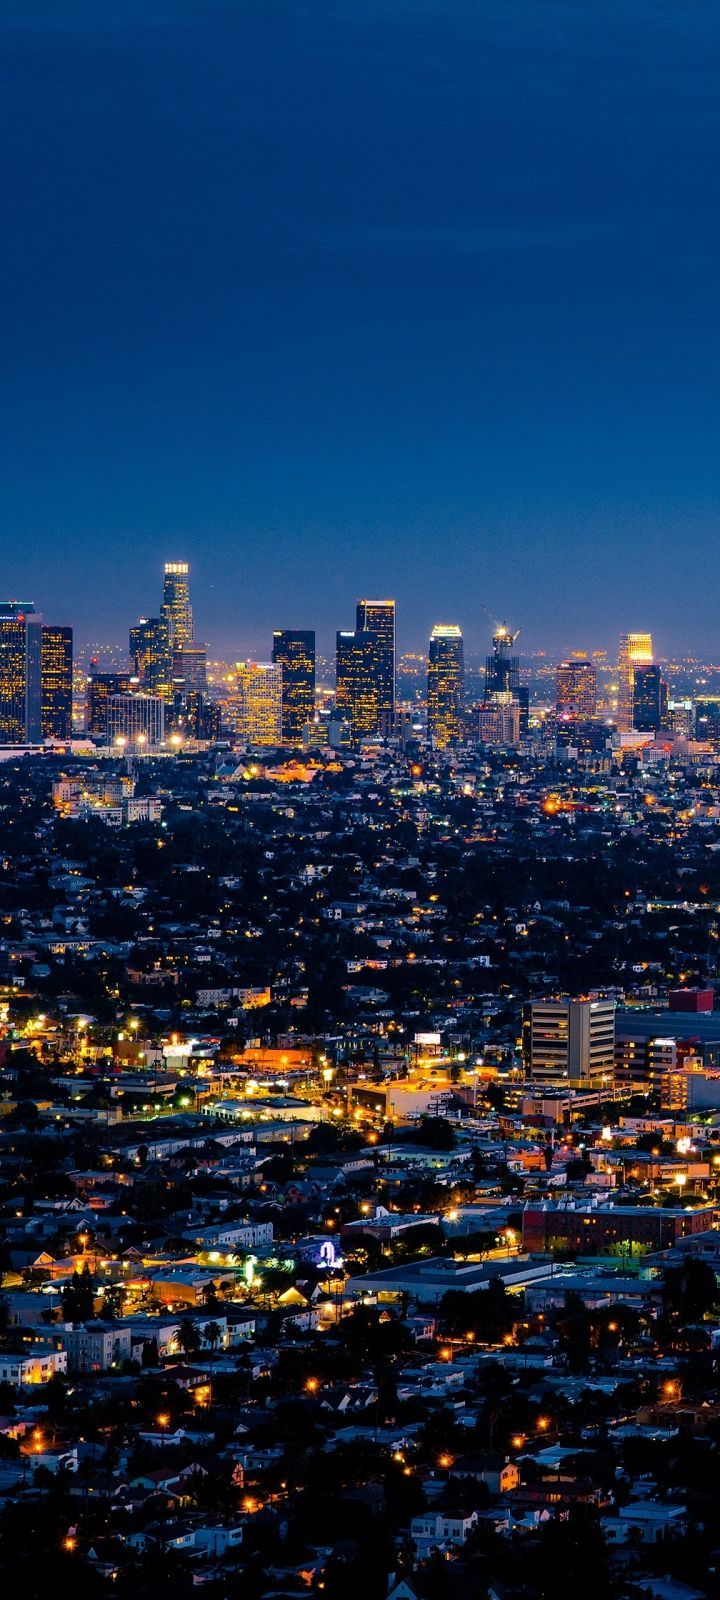 A city skyline at night with many lights - Los Angeles, California